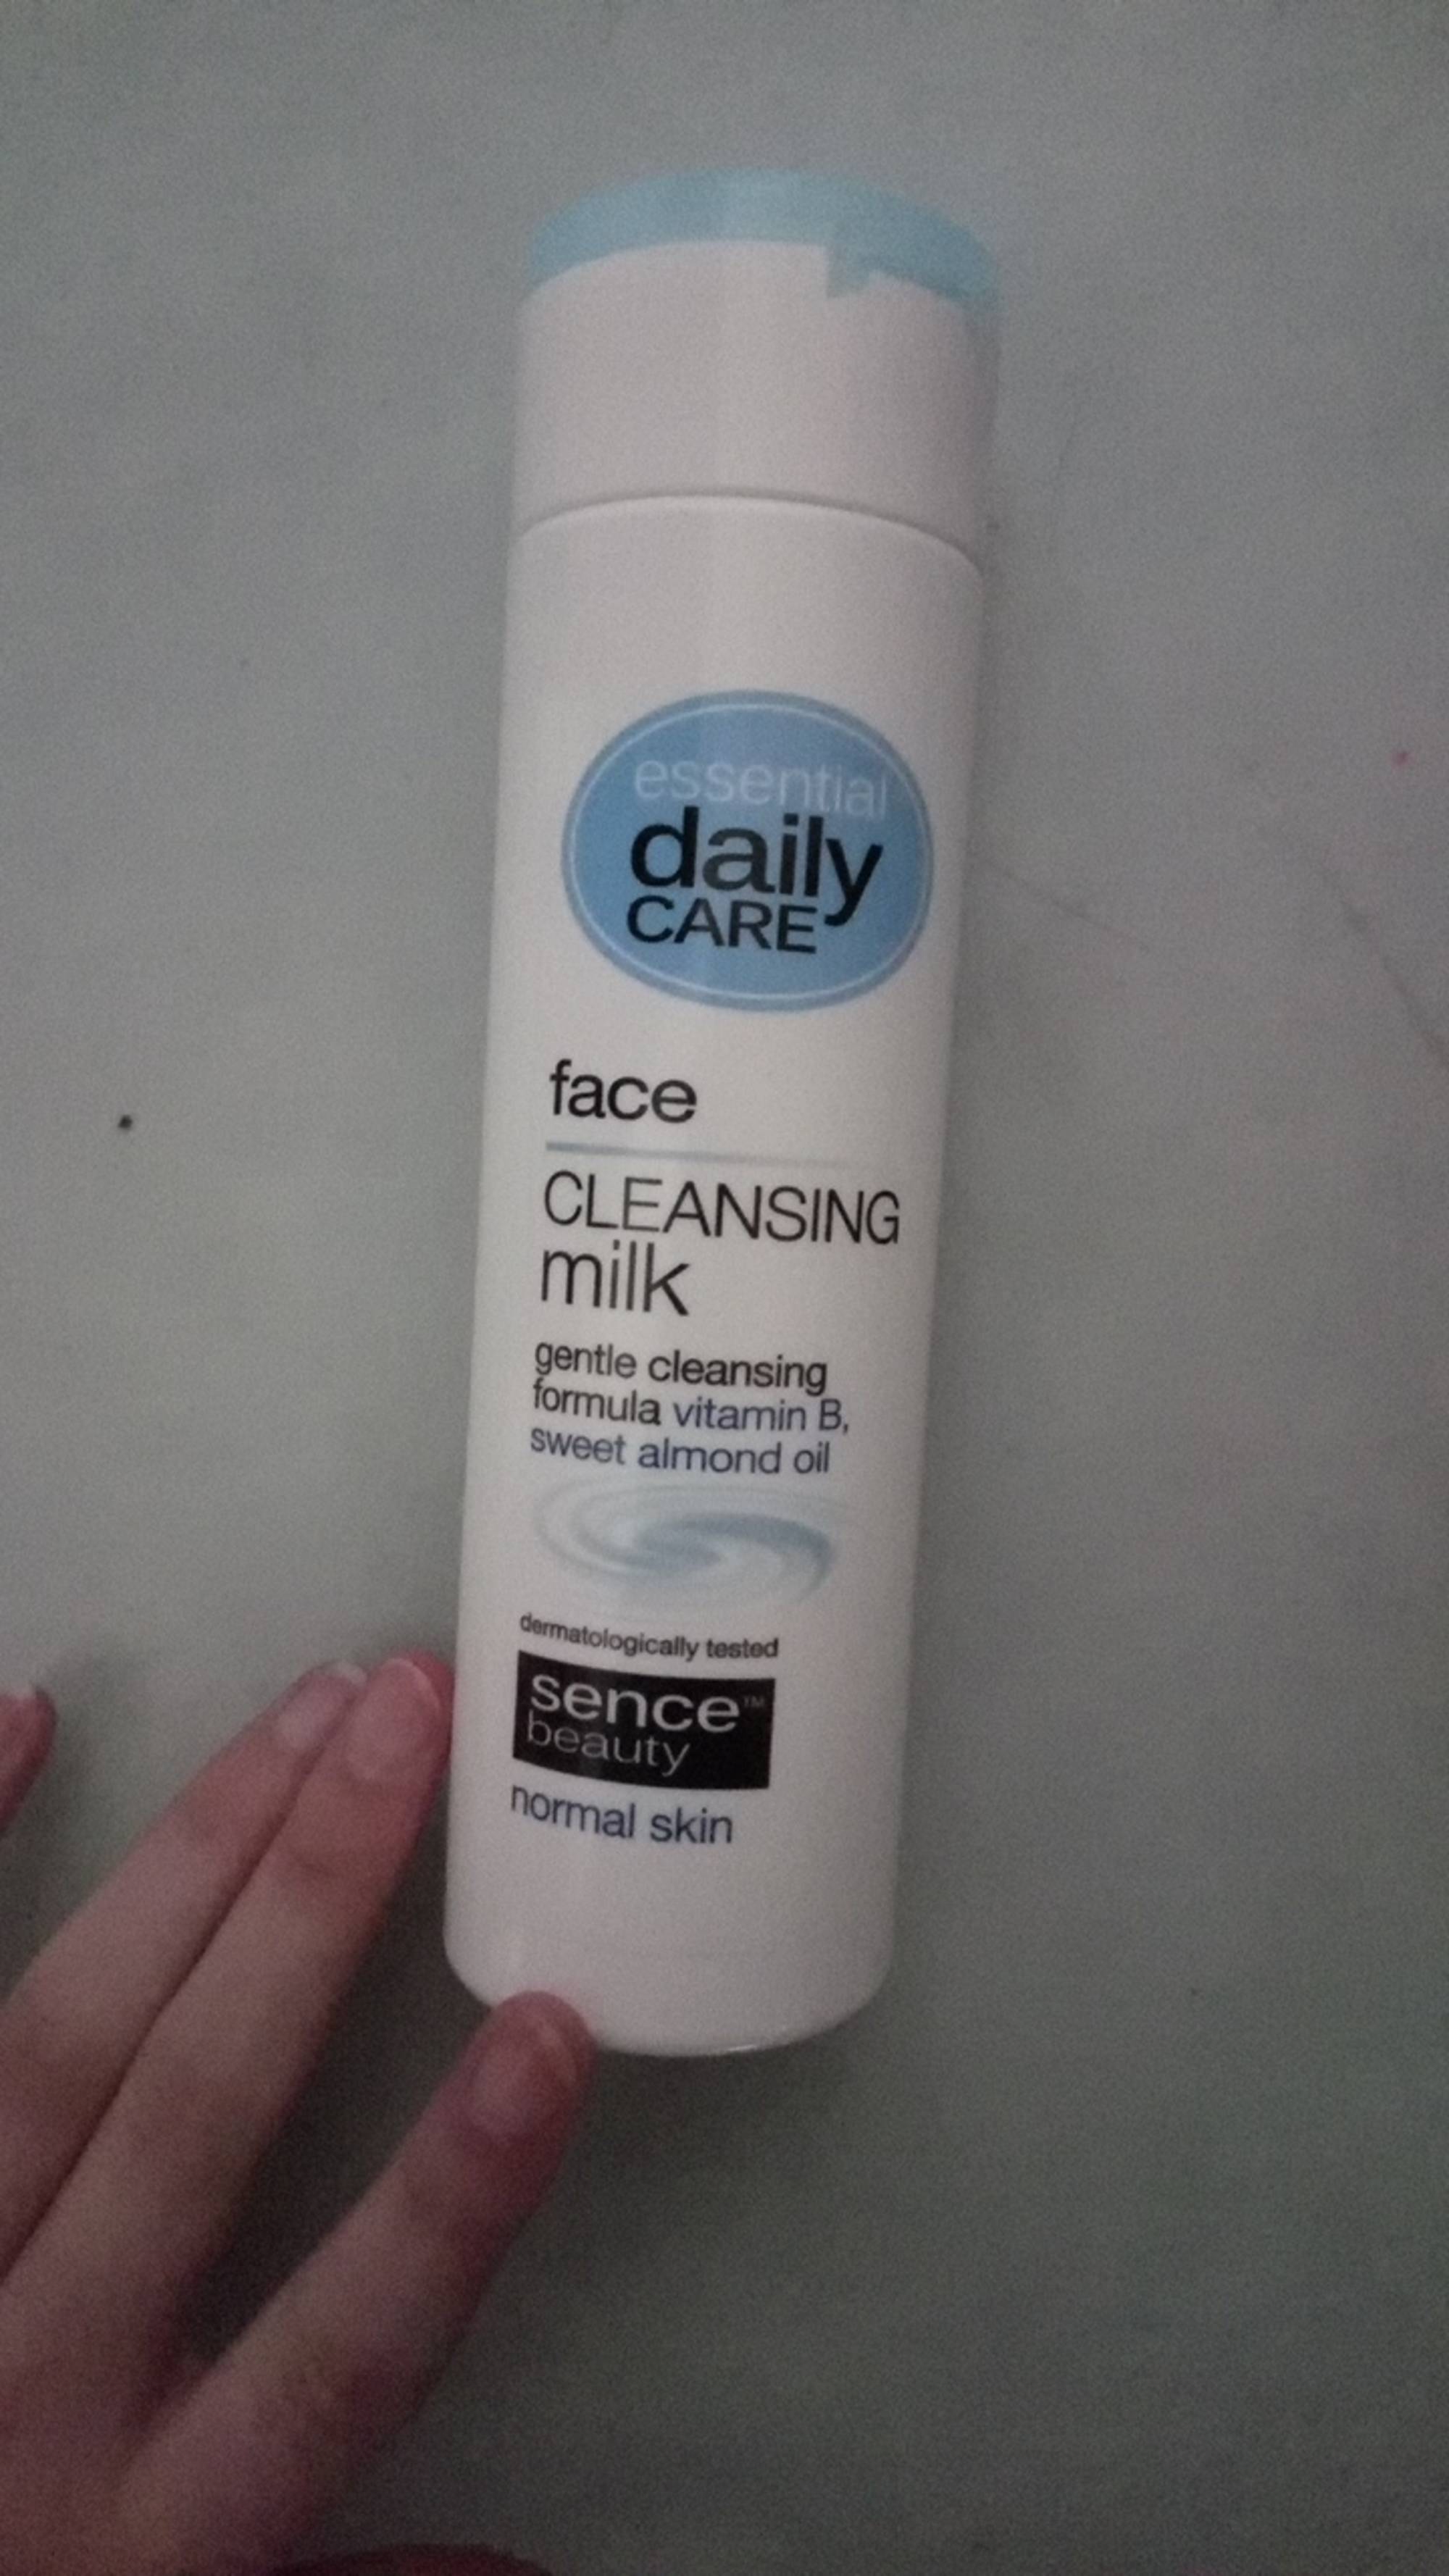 SENCE BEAUTY - Essential daily care - Cleansing milk face